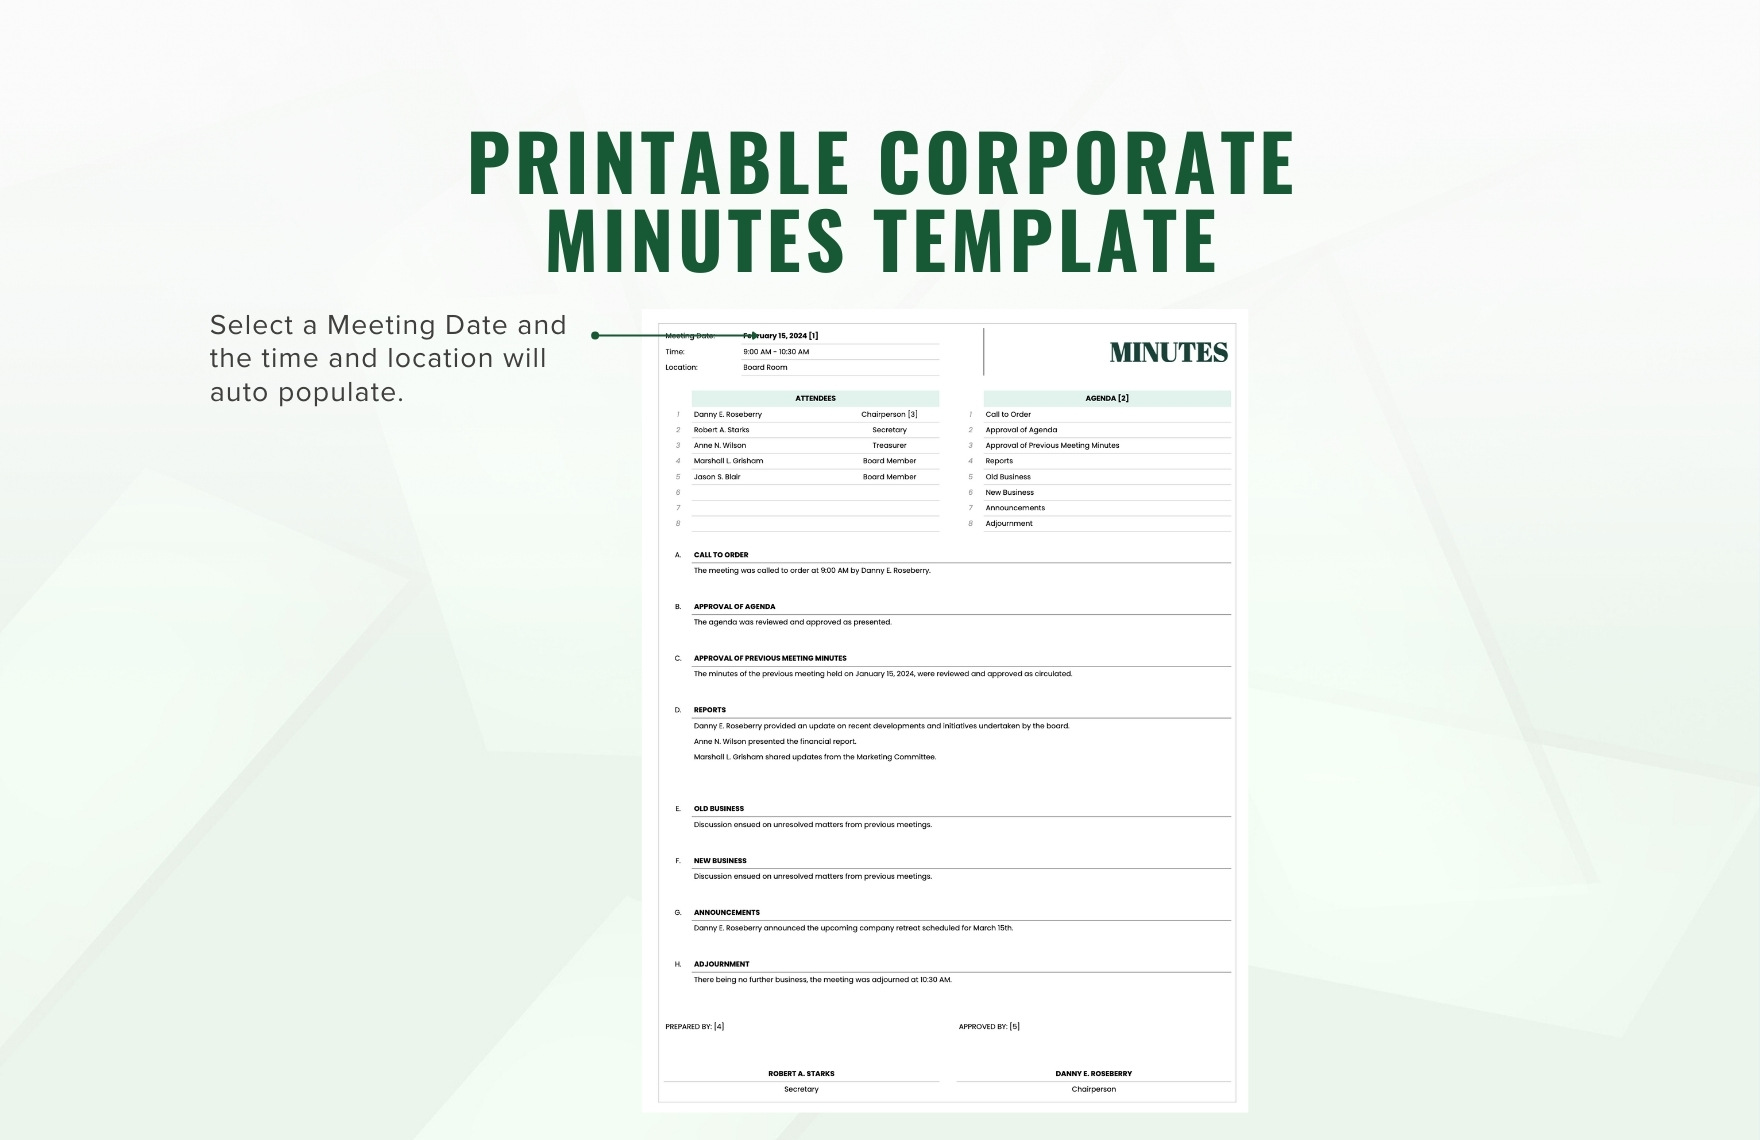 Printable Corporate Minutes Template